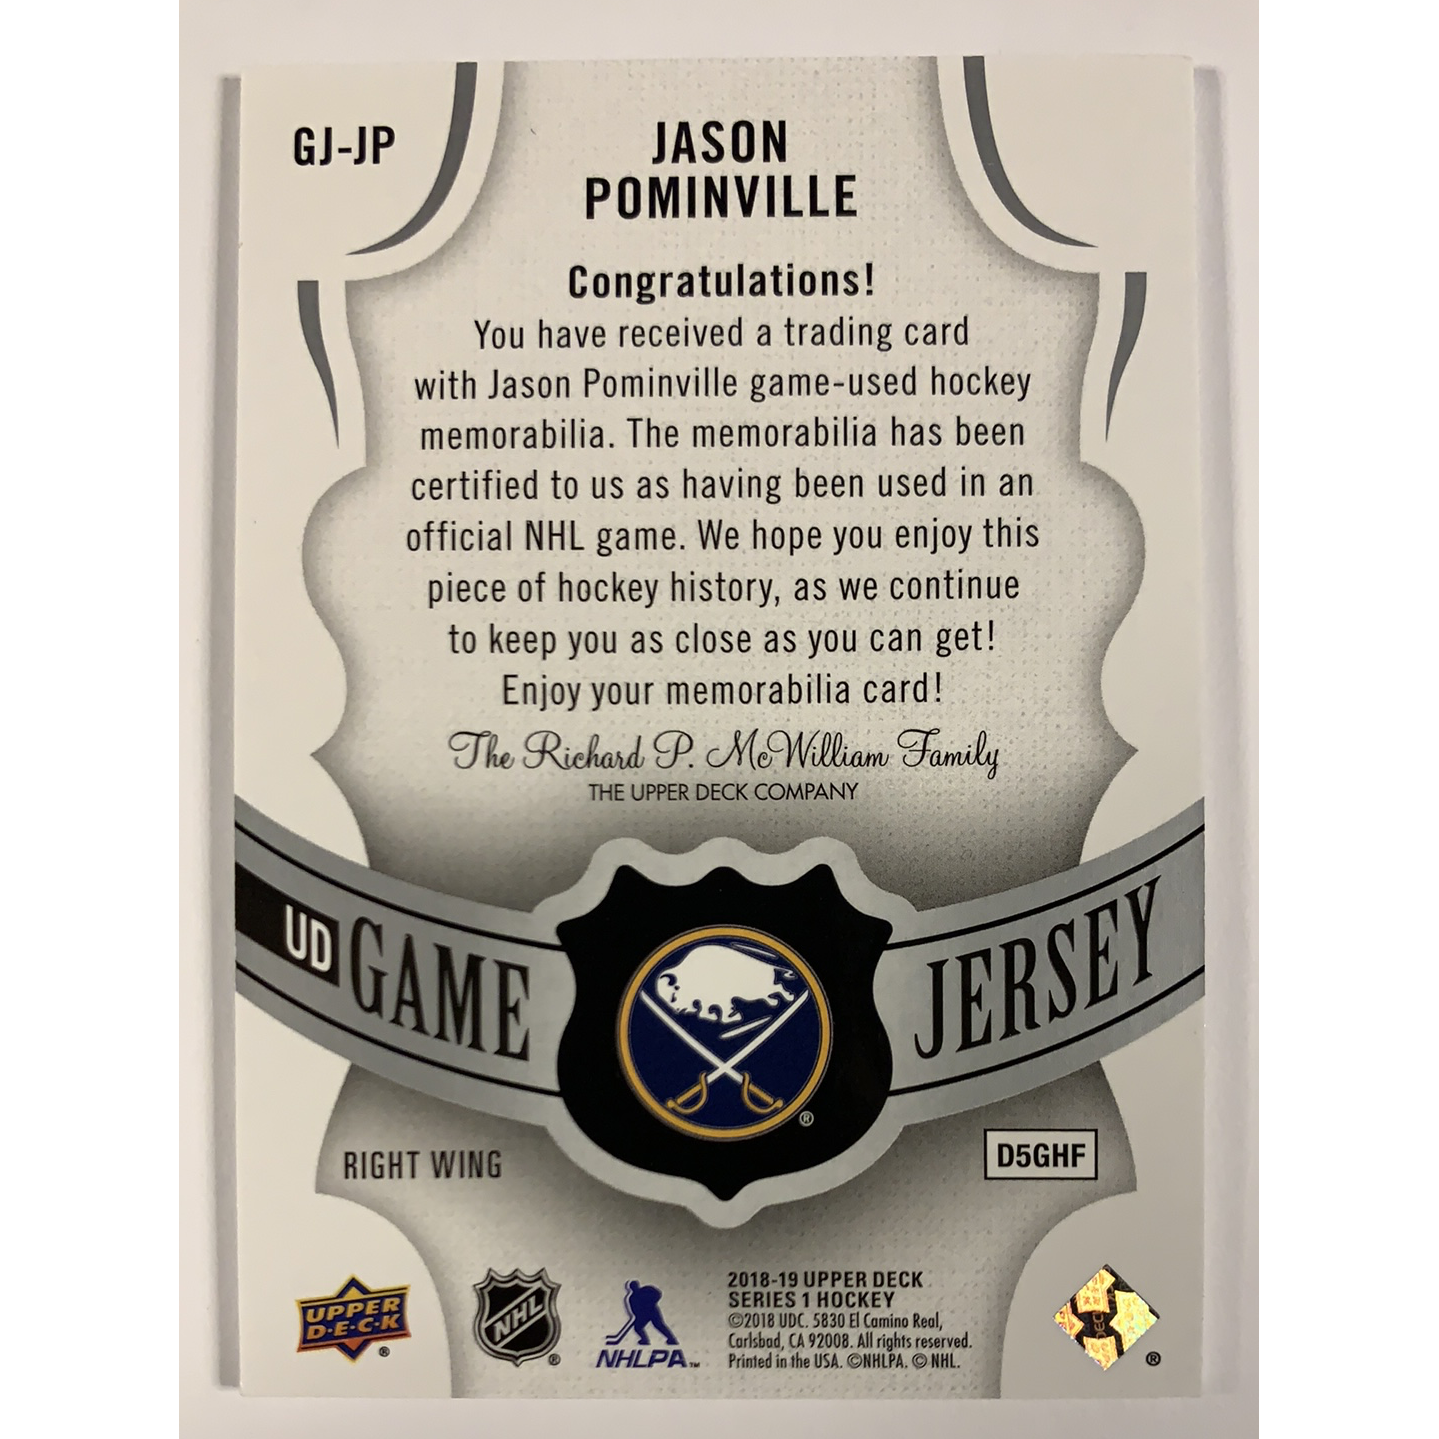  2018-19 Upper Deck Jason Pominvile Game Jersey  Local Legends Cards & Collectibles